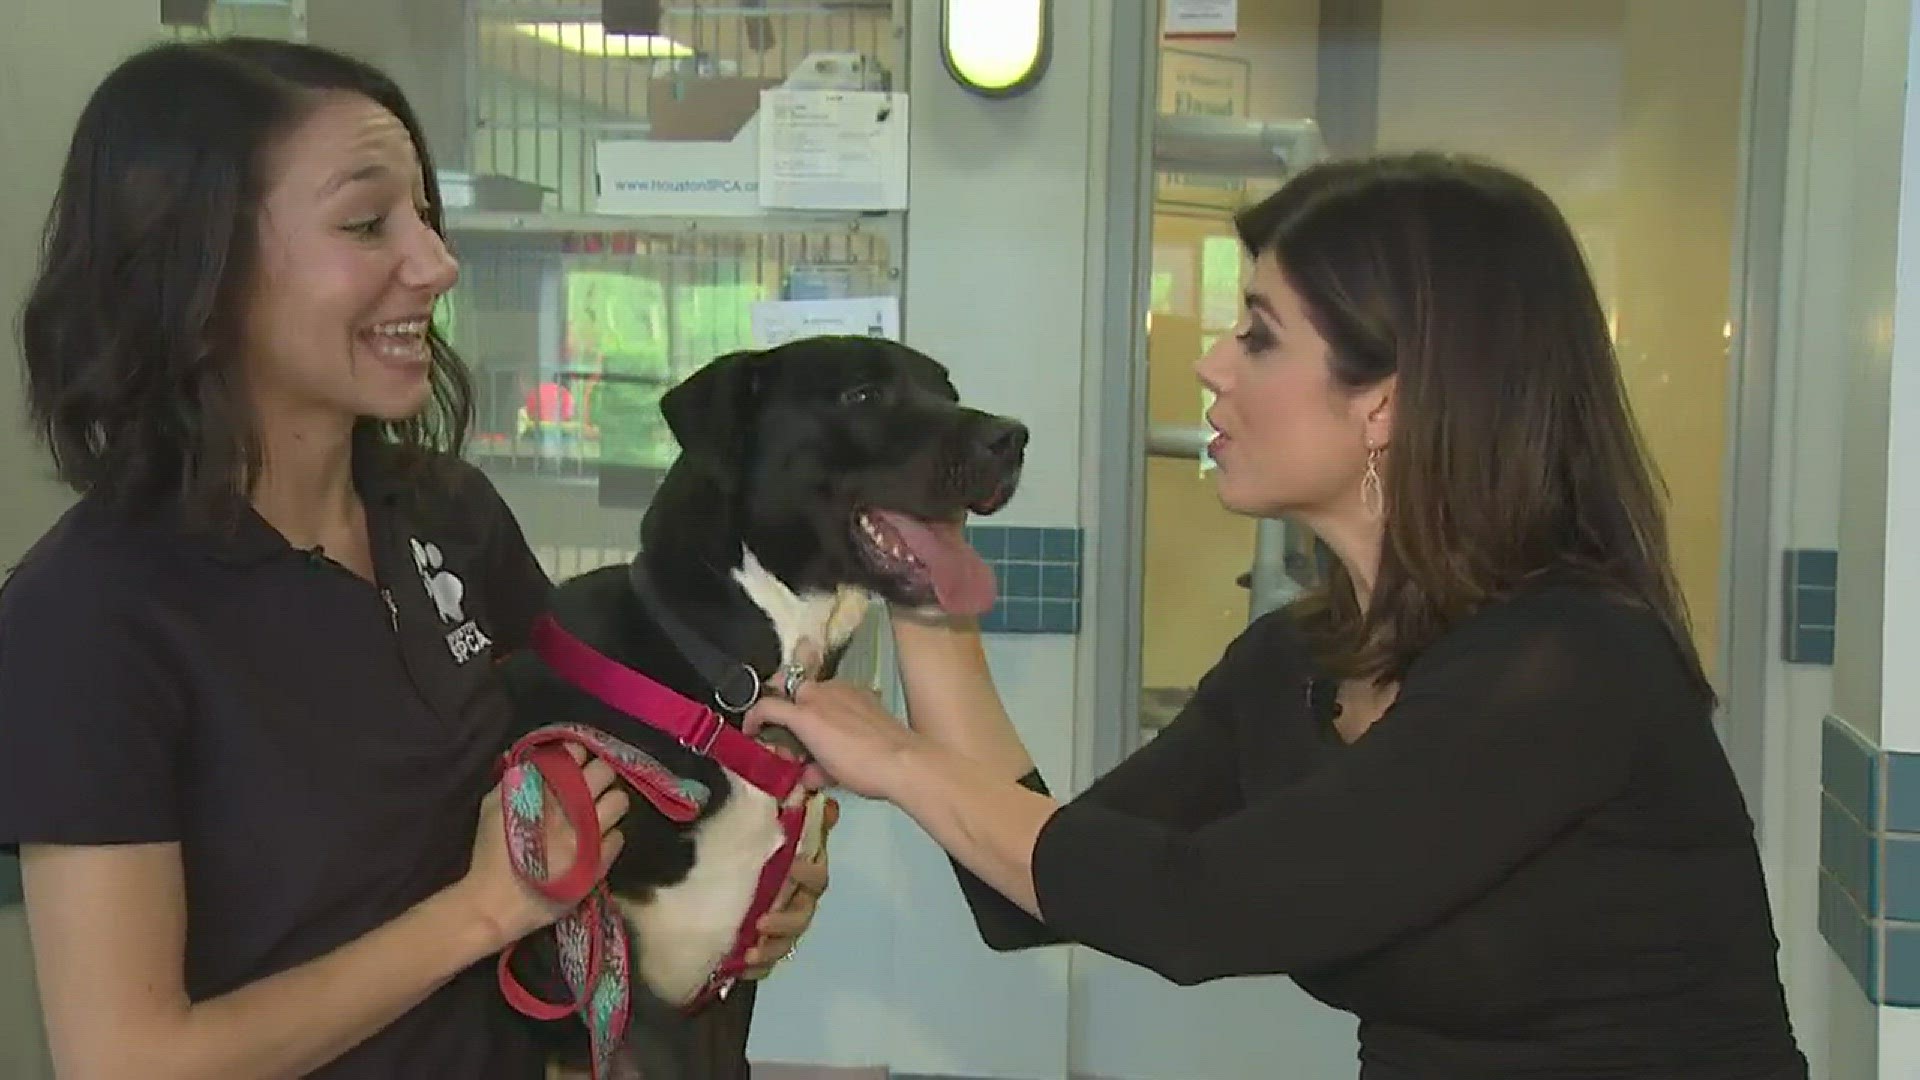 Our Pet of the Week is a beautiful, high-energy black lab mix named Cooper. He's a "65-pound lap dog" that loves people and also loves attention. For more information on Cooper and other homeless animals, please call the Houston SPCA at 713-869-SPCA (7722